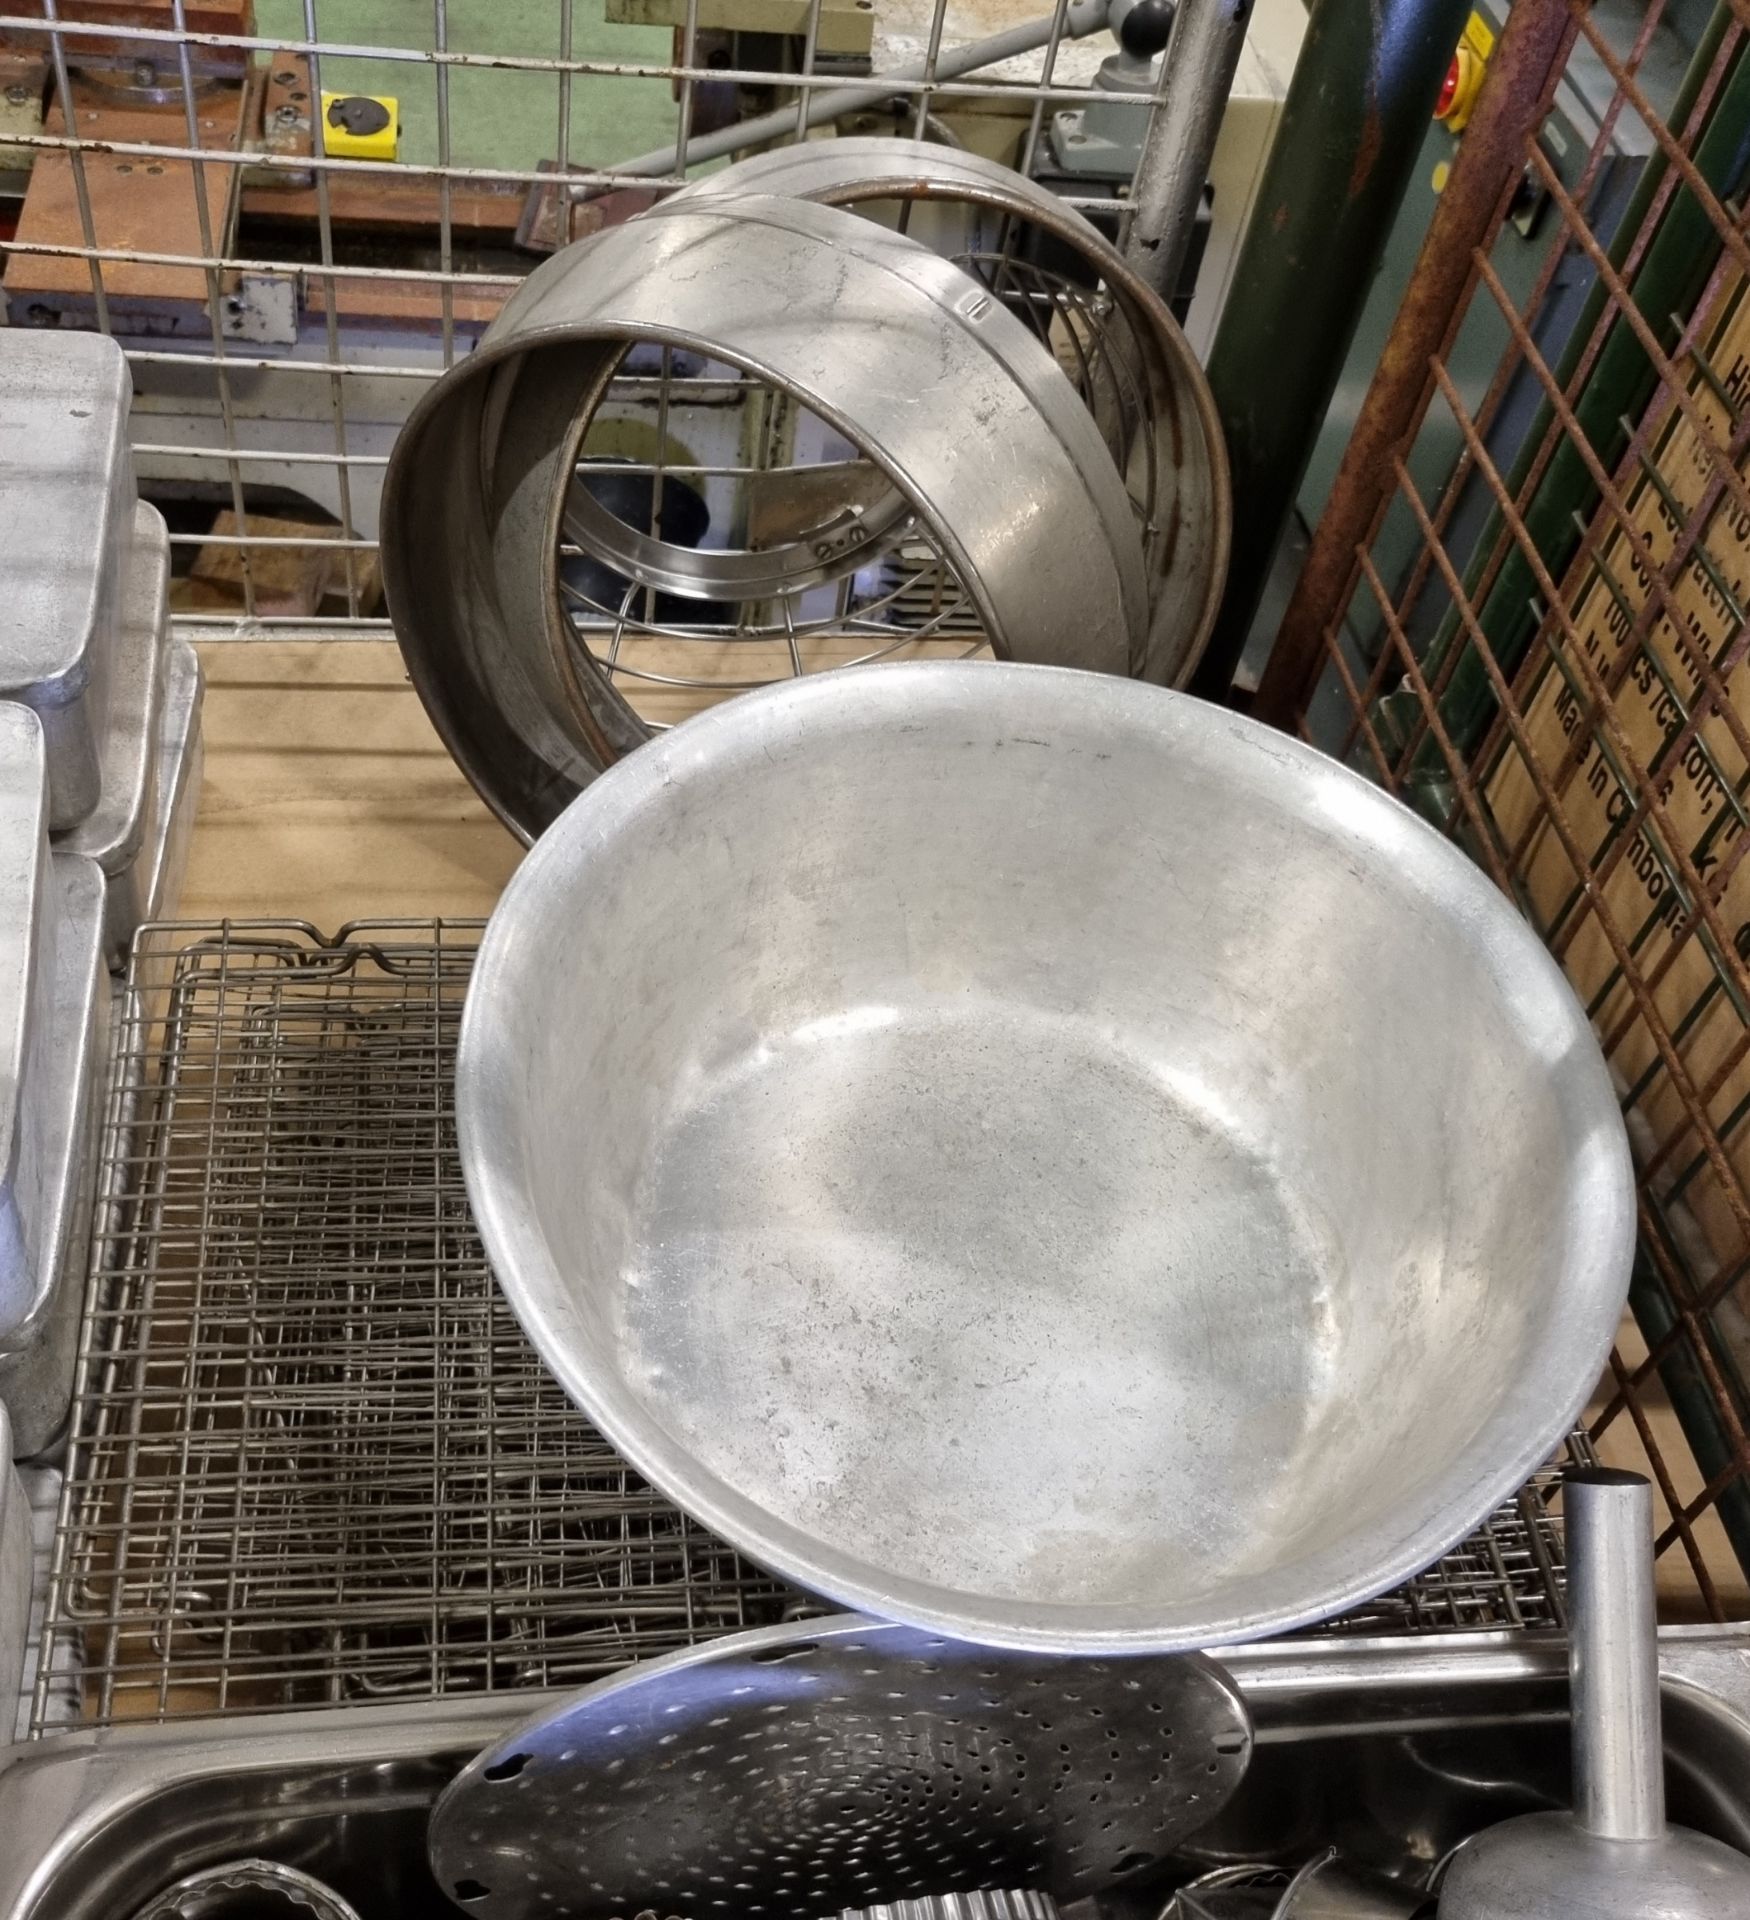 Catering equipment - aluminium trays with lids, cooling wire racks, scoops and cookie cutters - Bild 5 aus 6